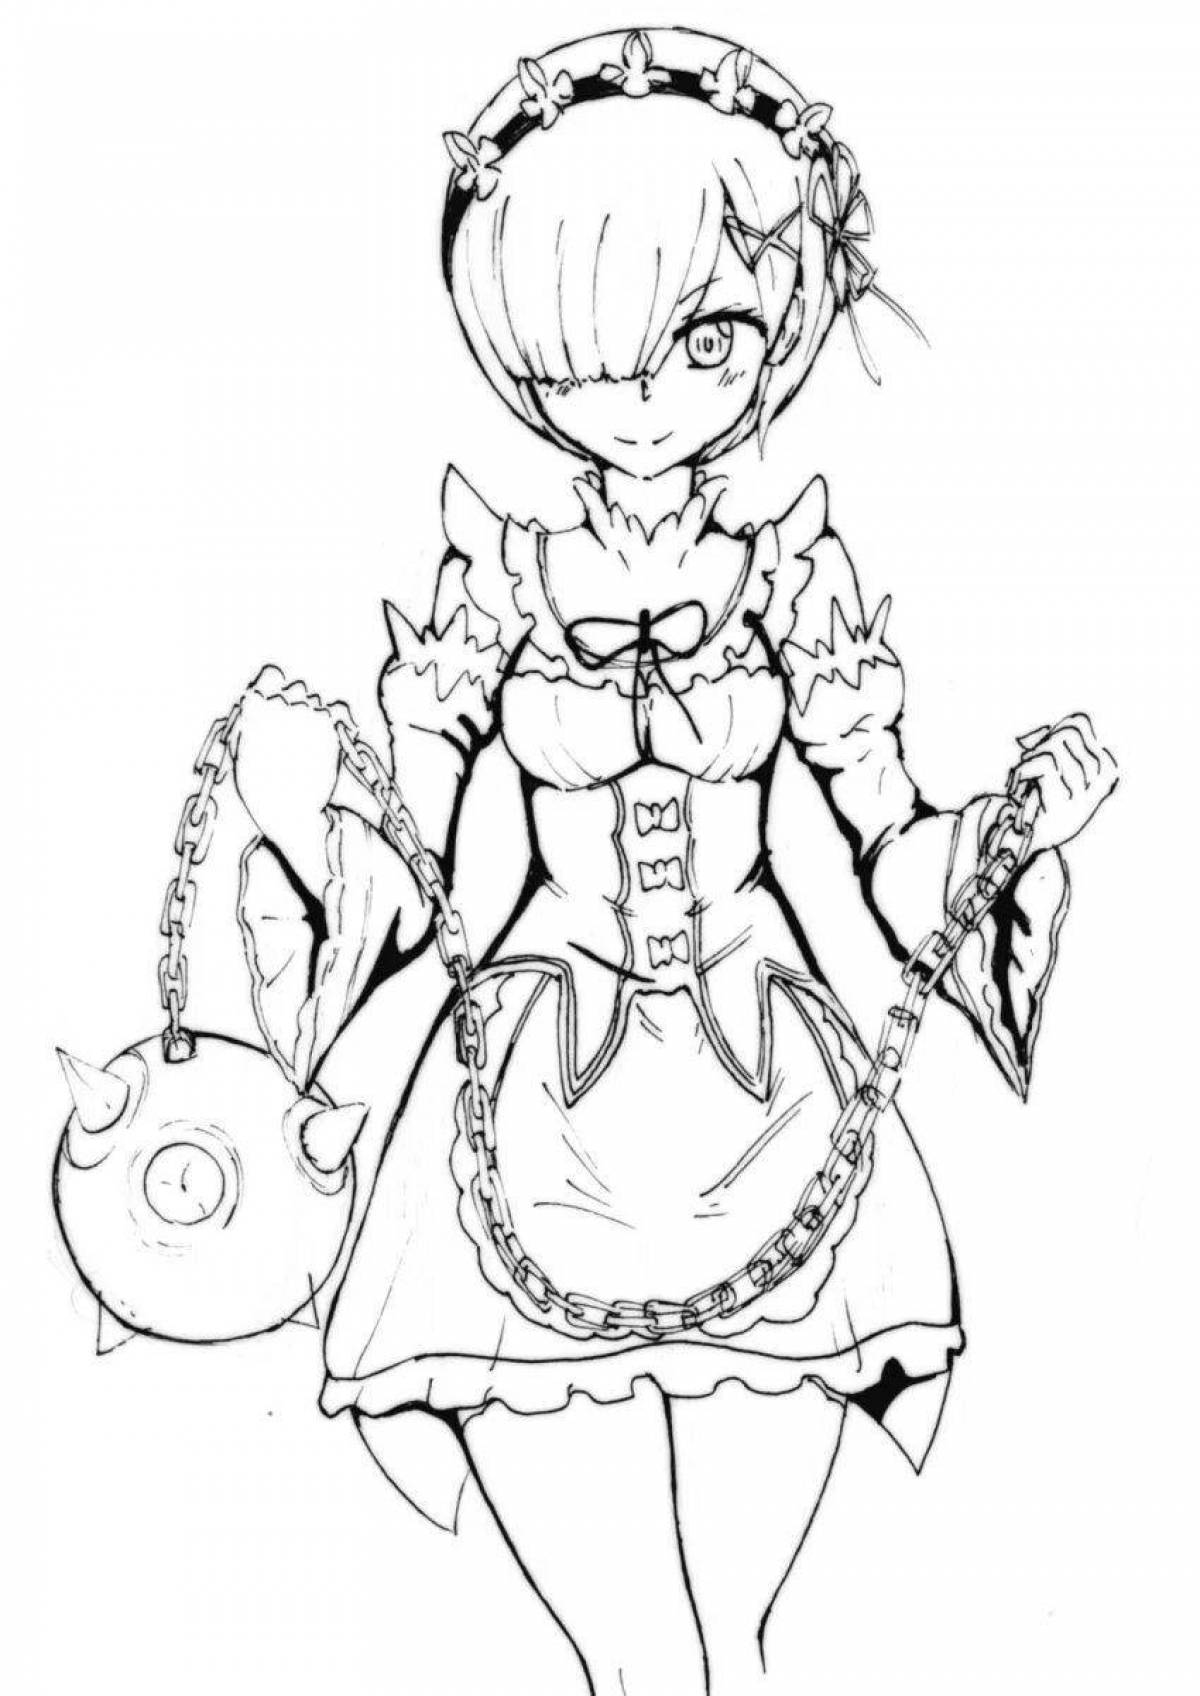 Delightful anime maid coloring page